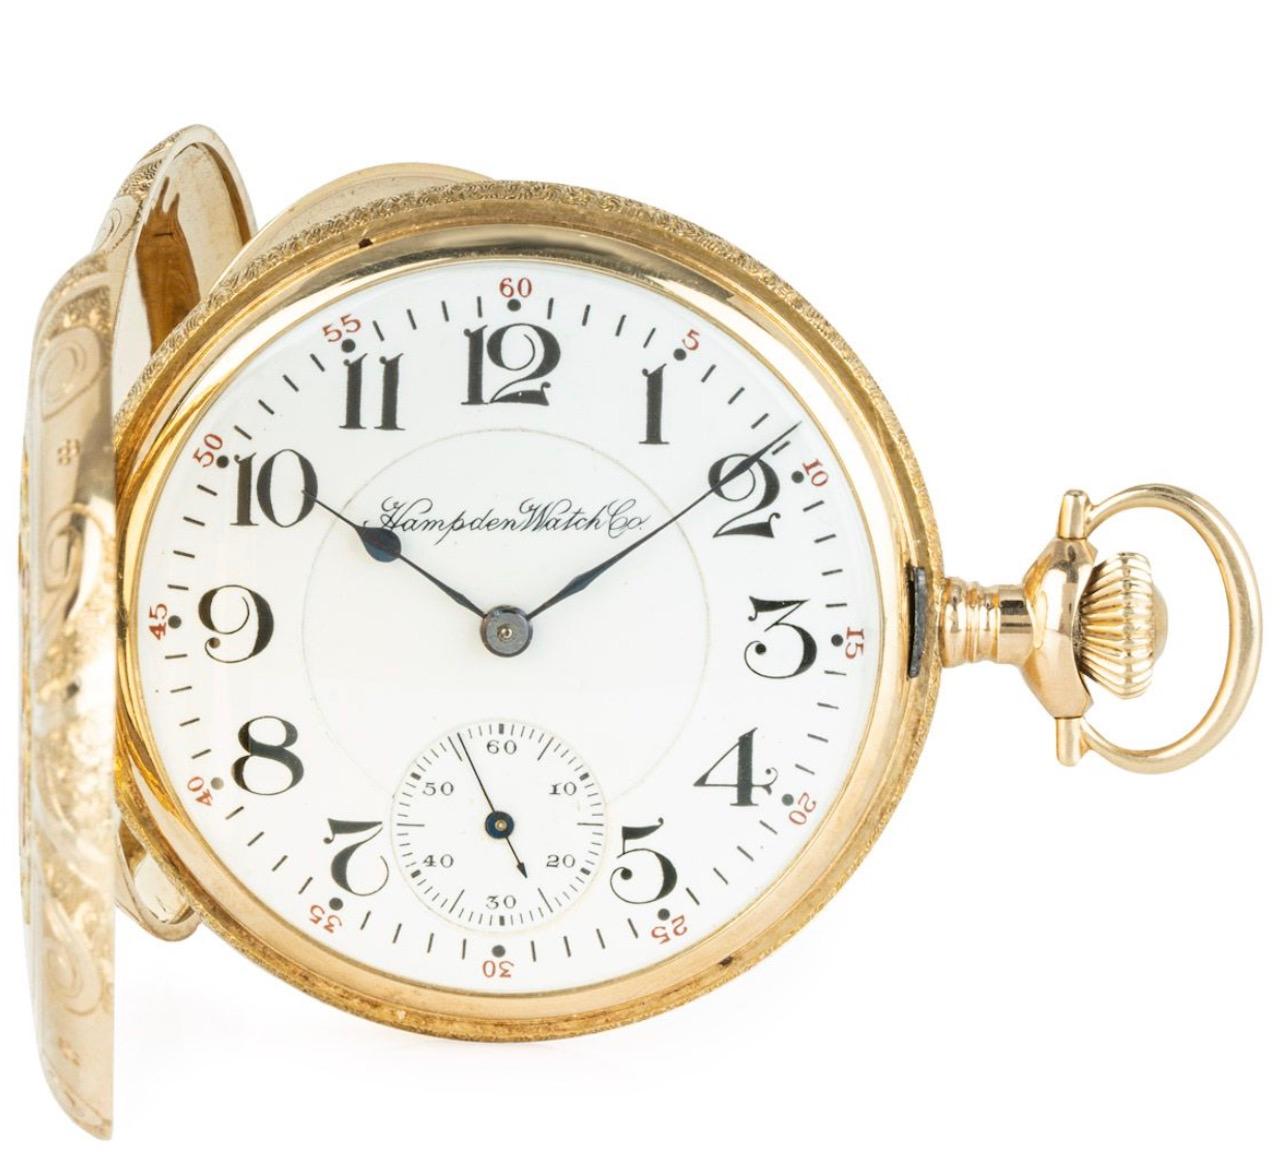 Hampden Watch Company, A 14ct multi coloured gold keyless lever full hunter pocket watch, C1890.

Dial: A beautiful condition white enamel dial with large Art Nouveau Arabic numerals with outer minute track and red Arabic five minute interval